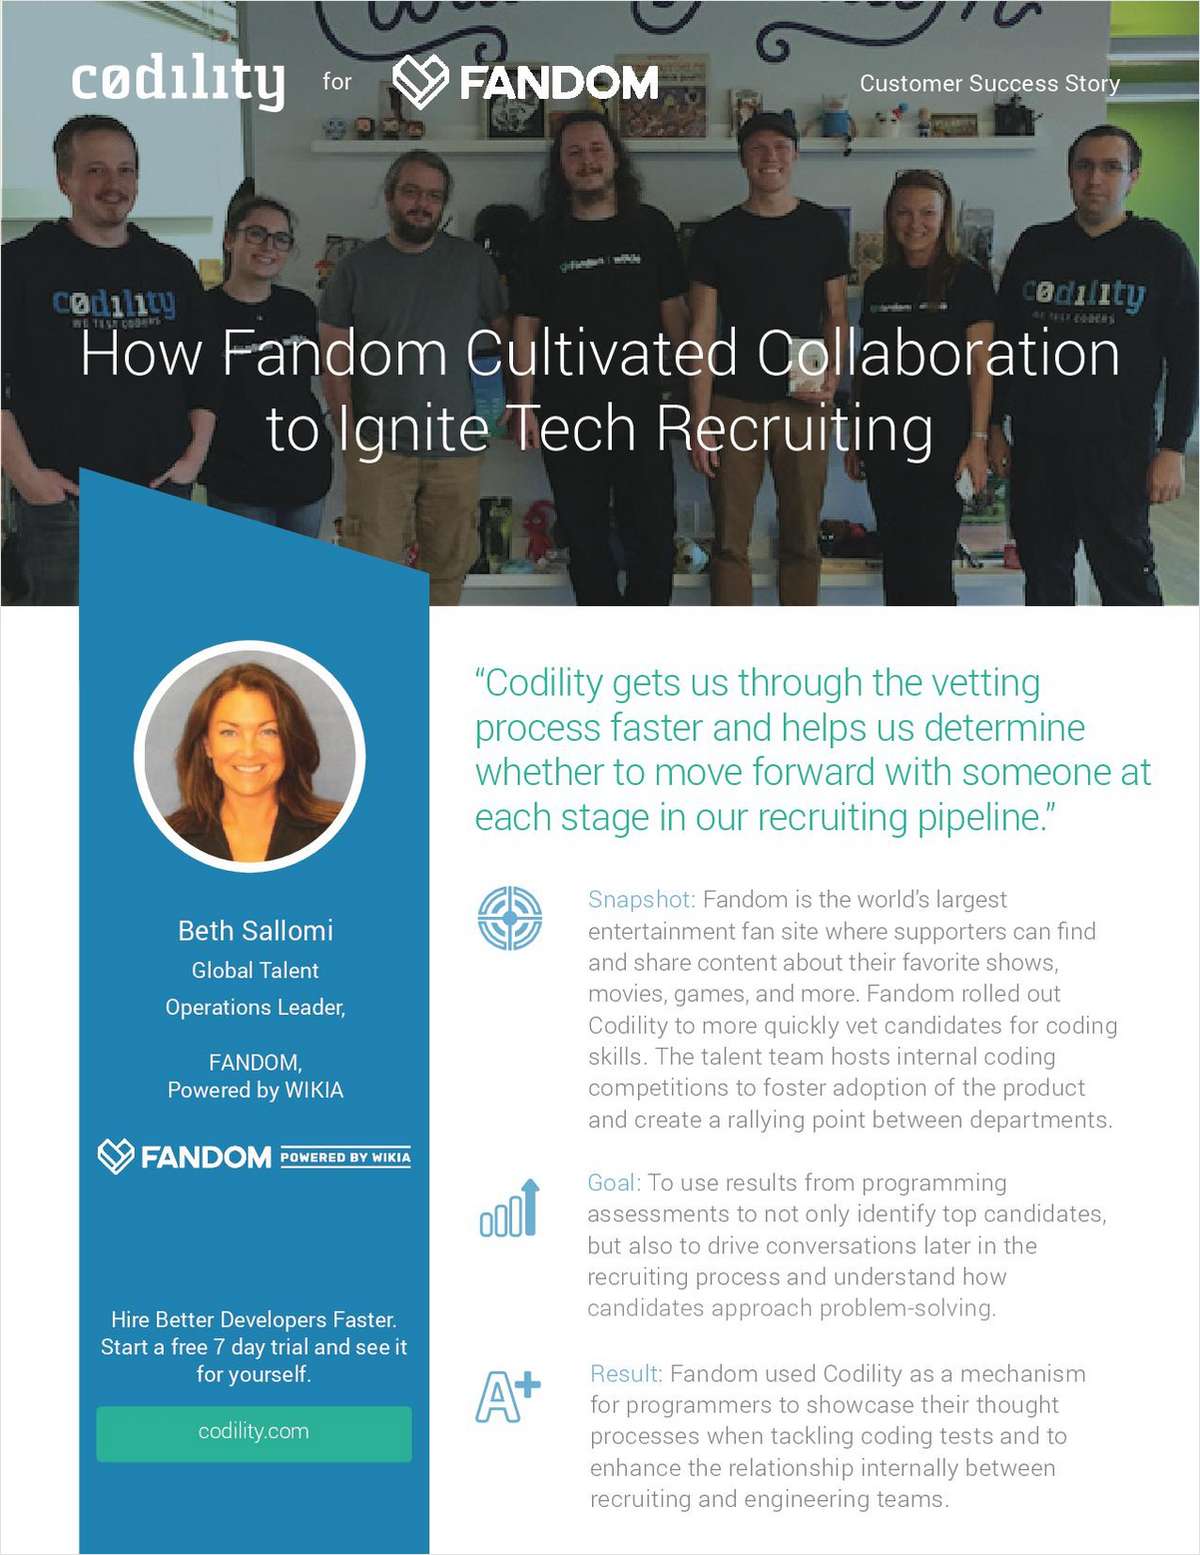 How Fandom Cultivated Collaboration to Ignite Tech Recruiting